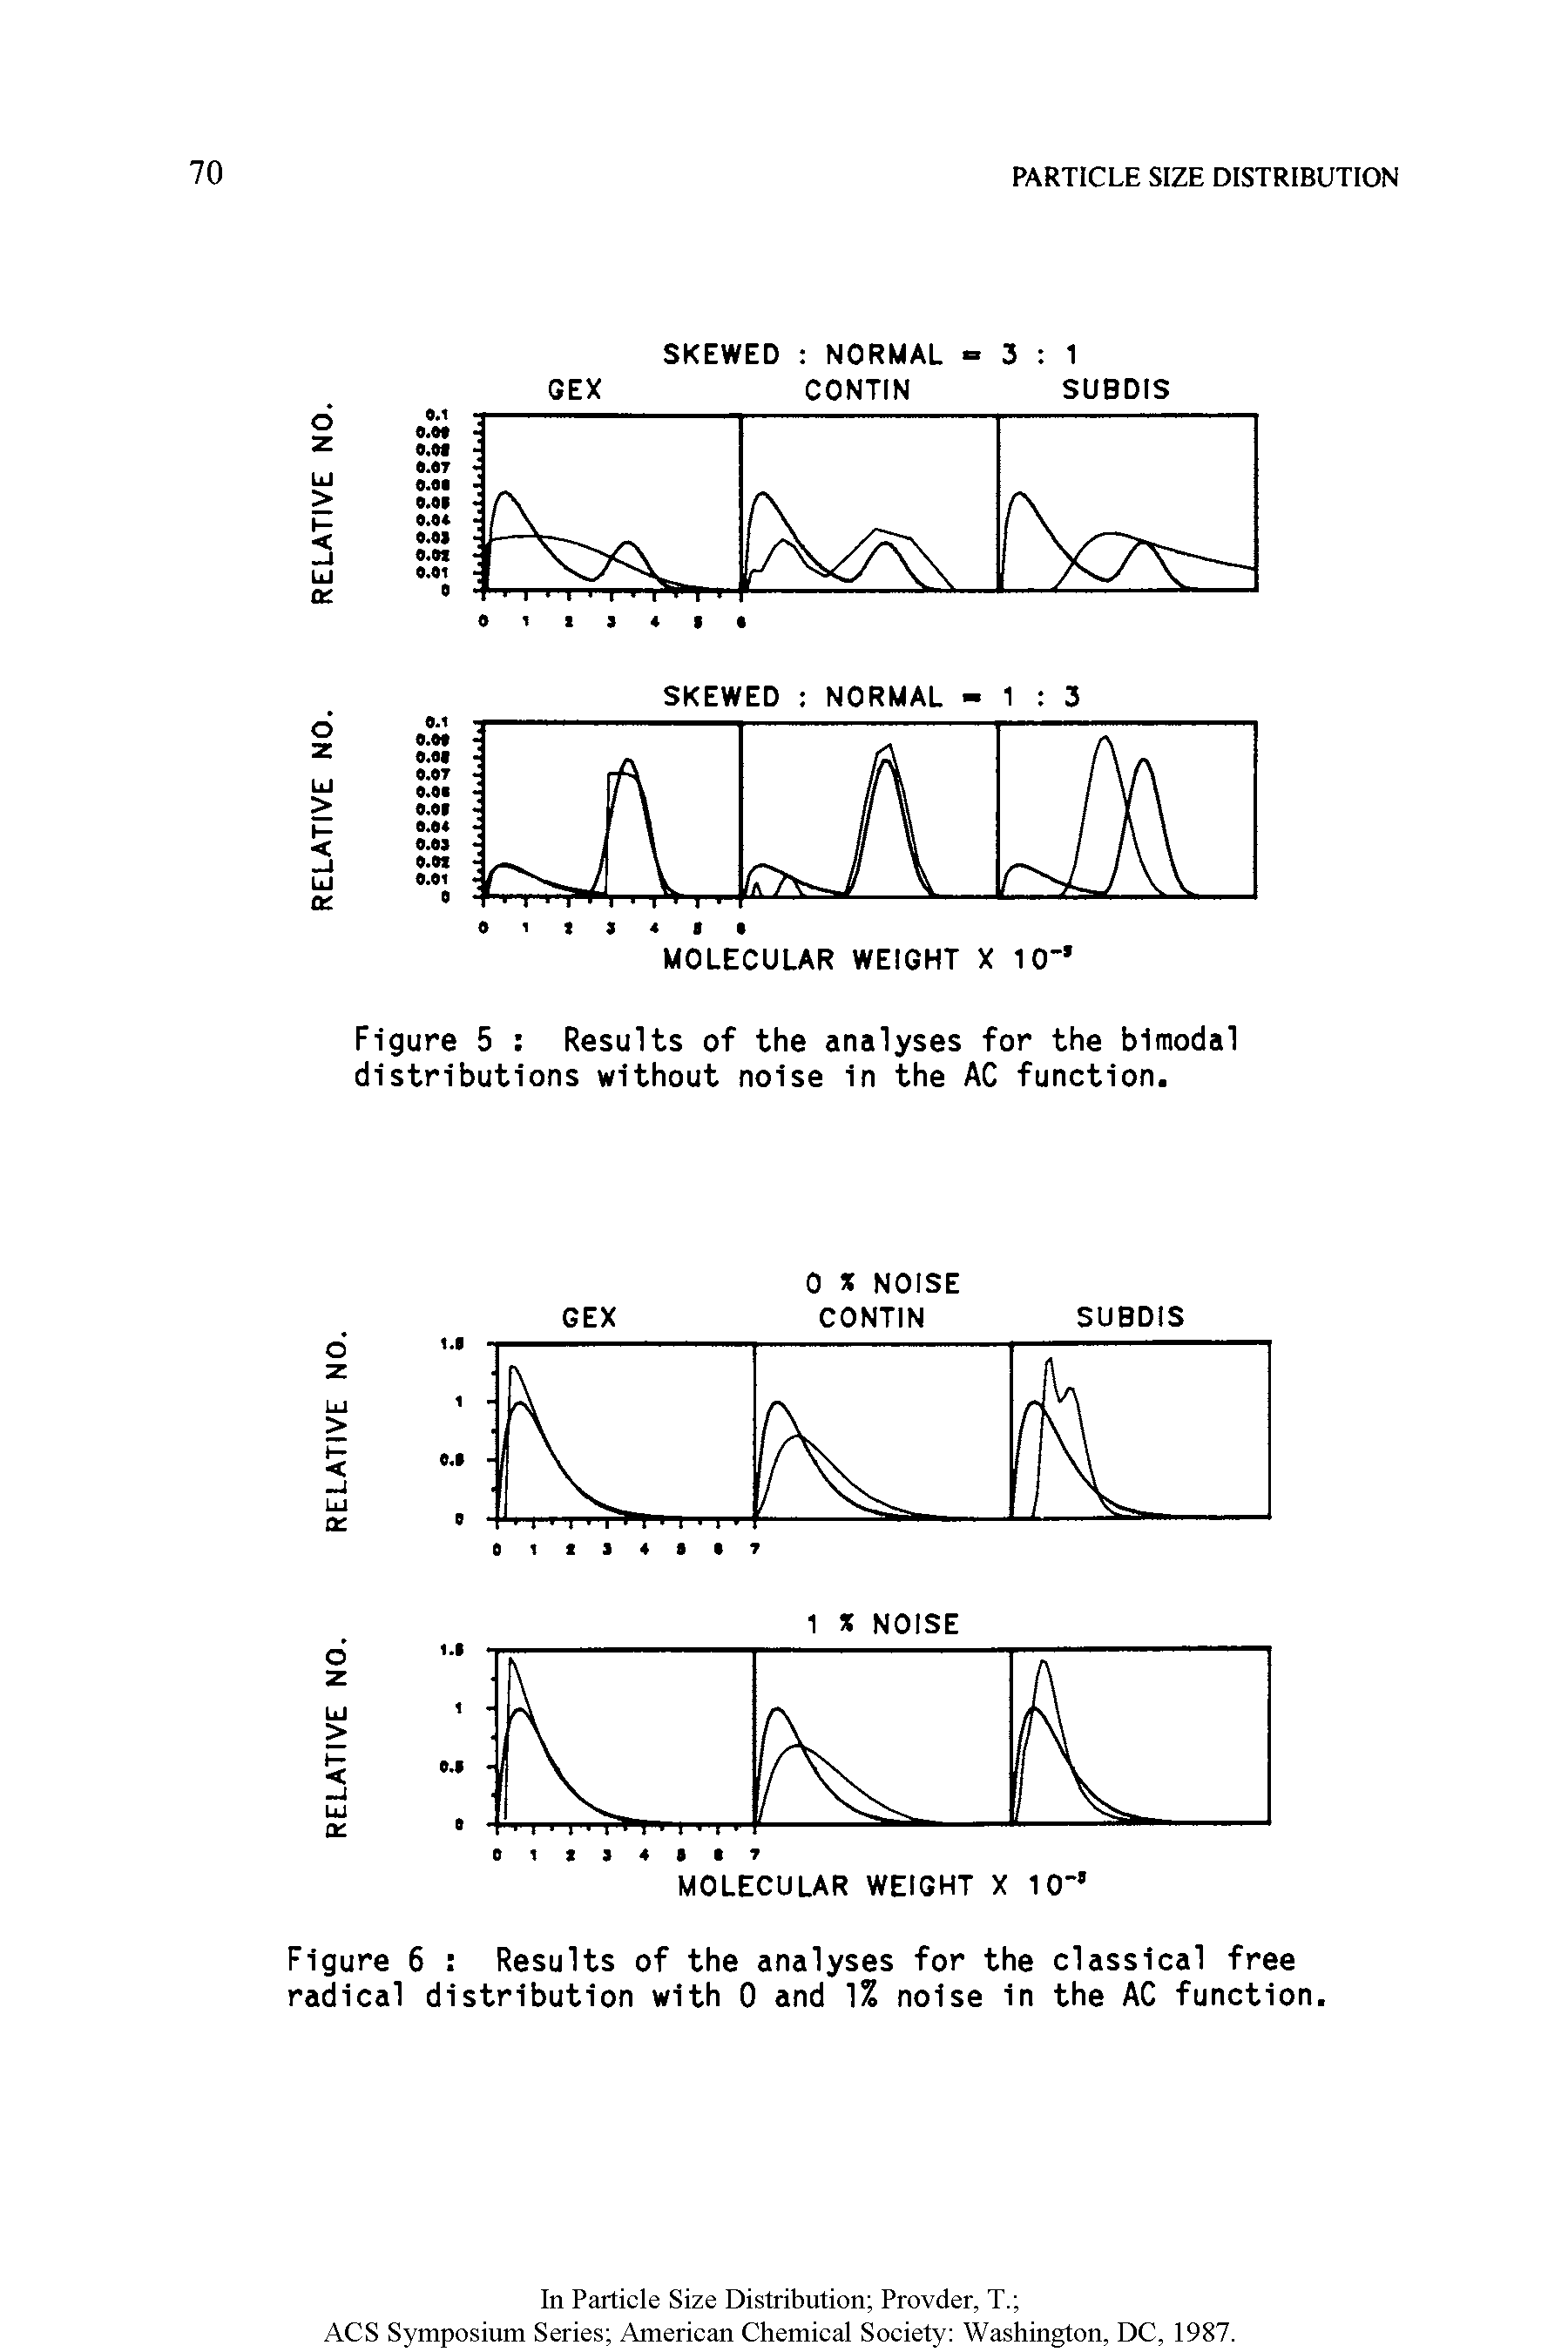 Figure 6 Results of the analyses for the classical free radical distribution with 0 and 1% noise in the AC function.